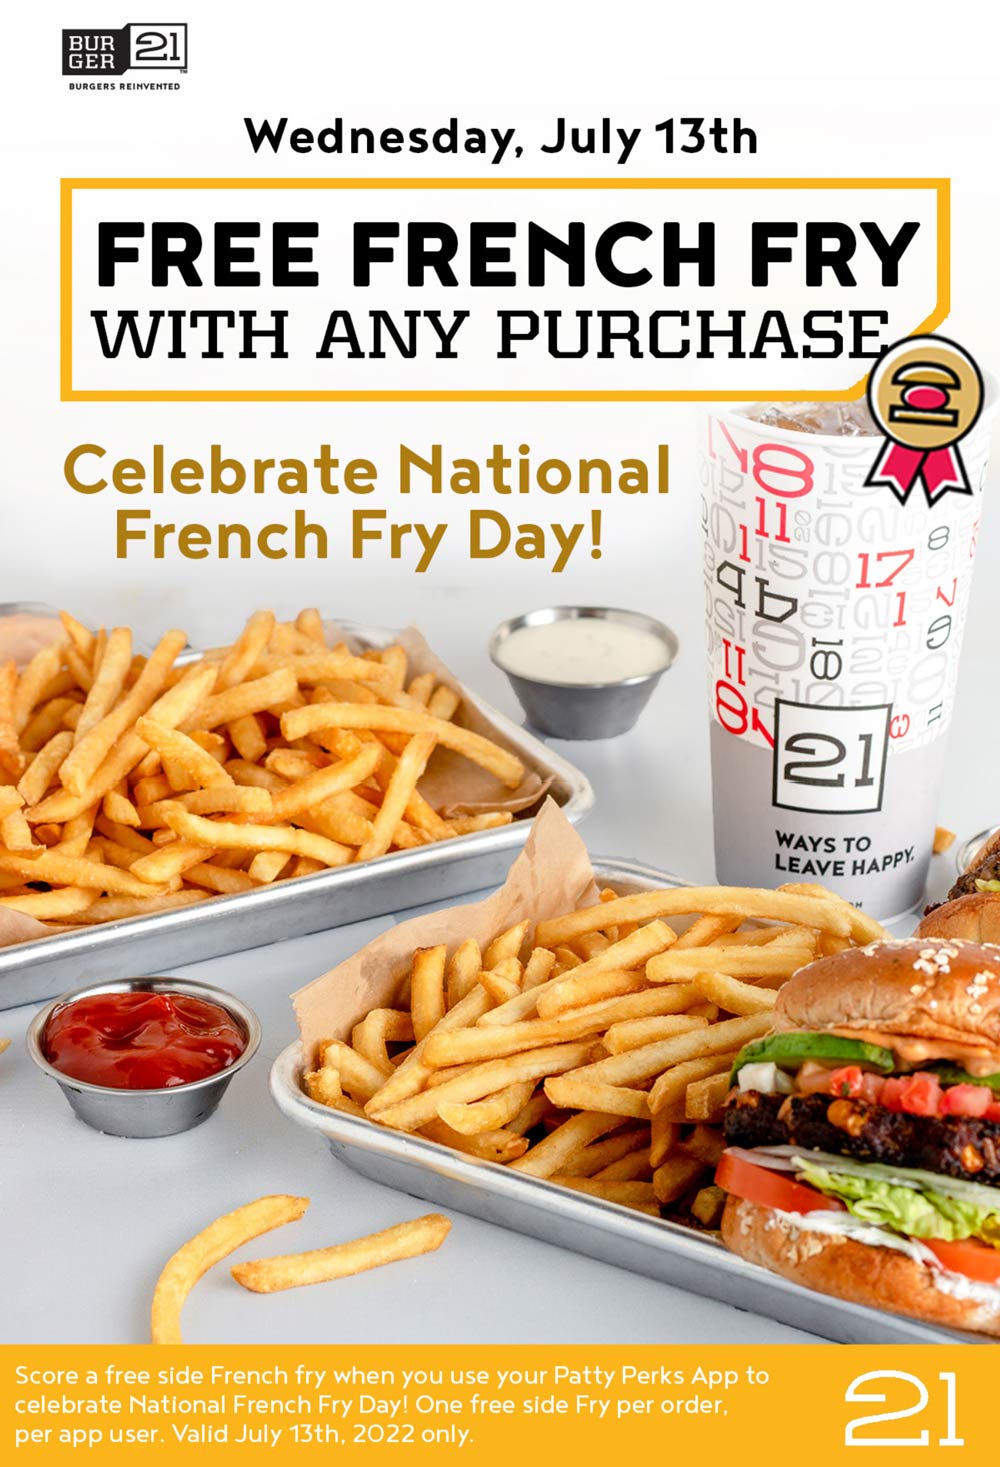 Burger 21 restaurants Coupon  Free french fries with your order today at Burger 21 restaurants #burger21 